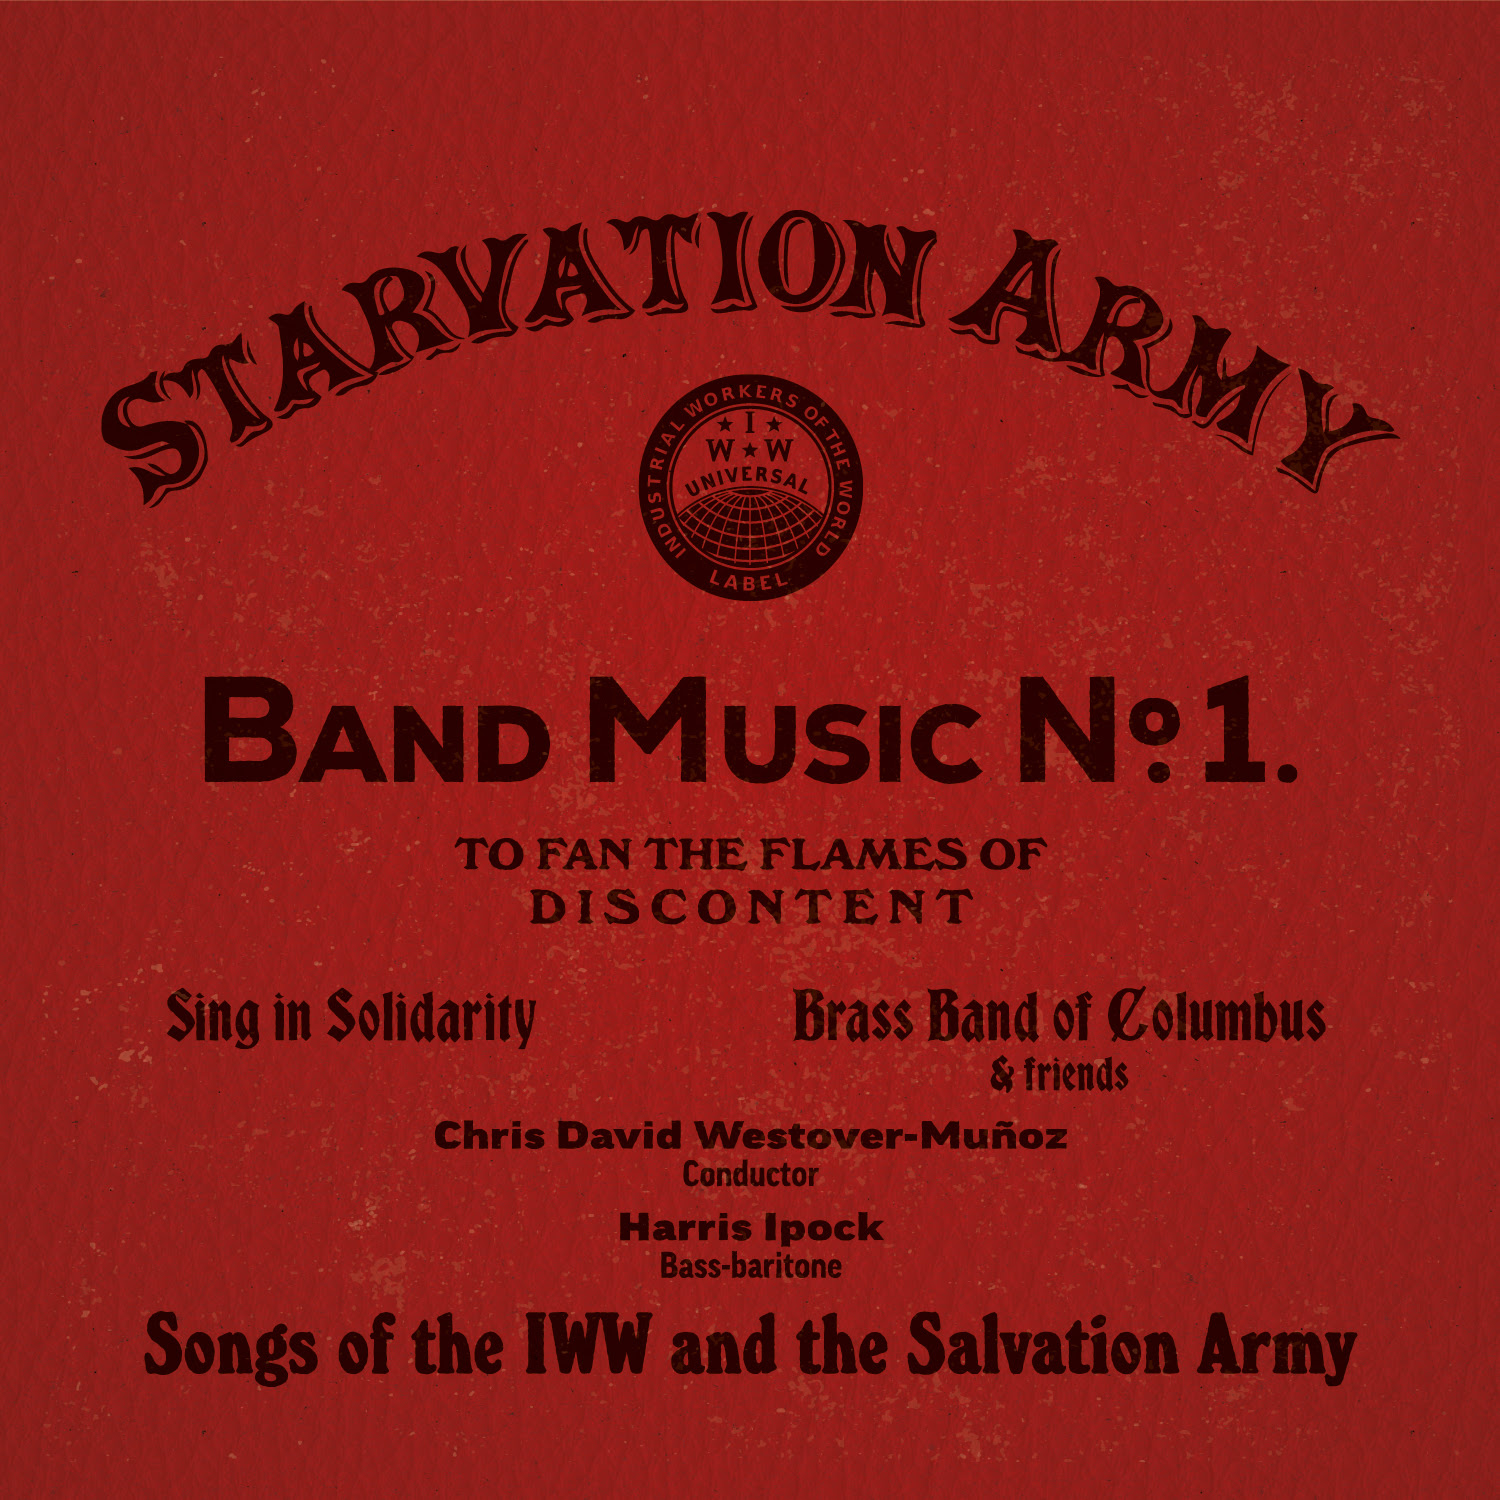 an infamous labor battle of the early 1900s sparked this album of satirical brass band songs!